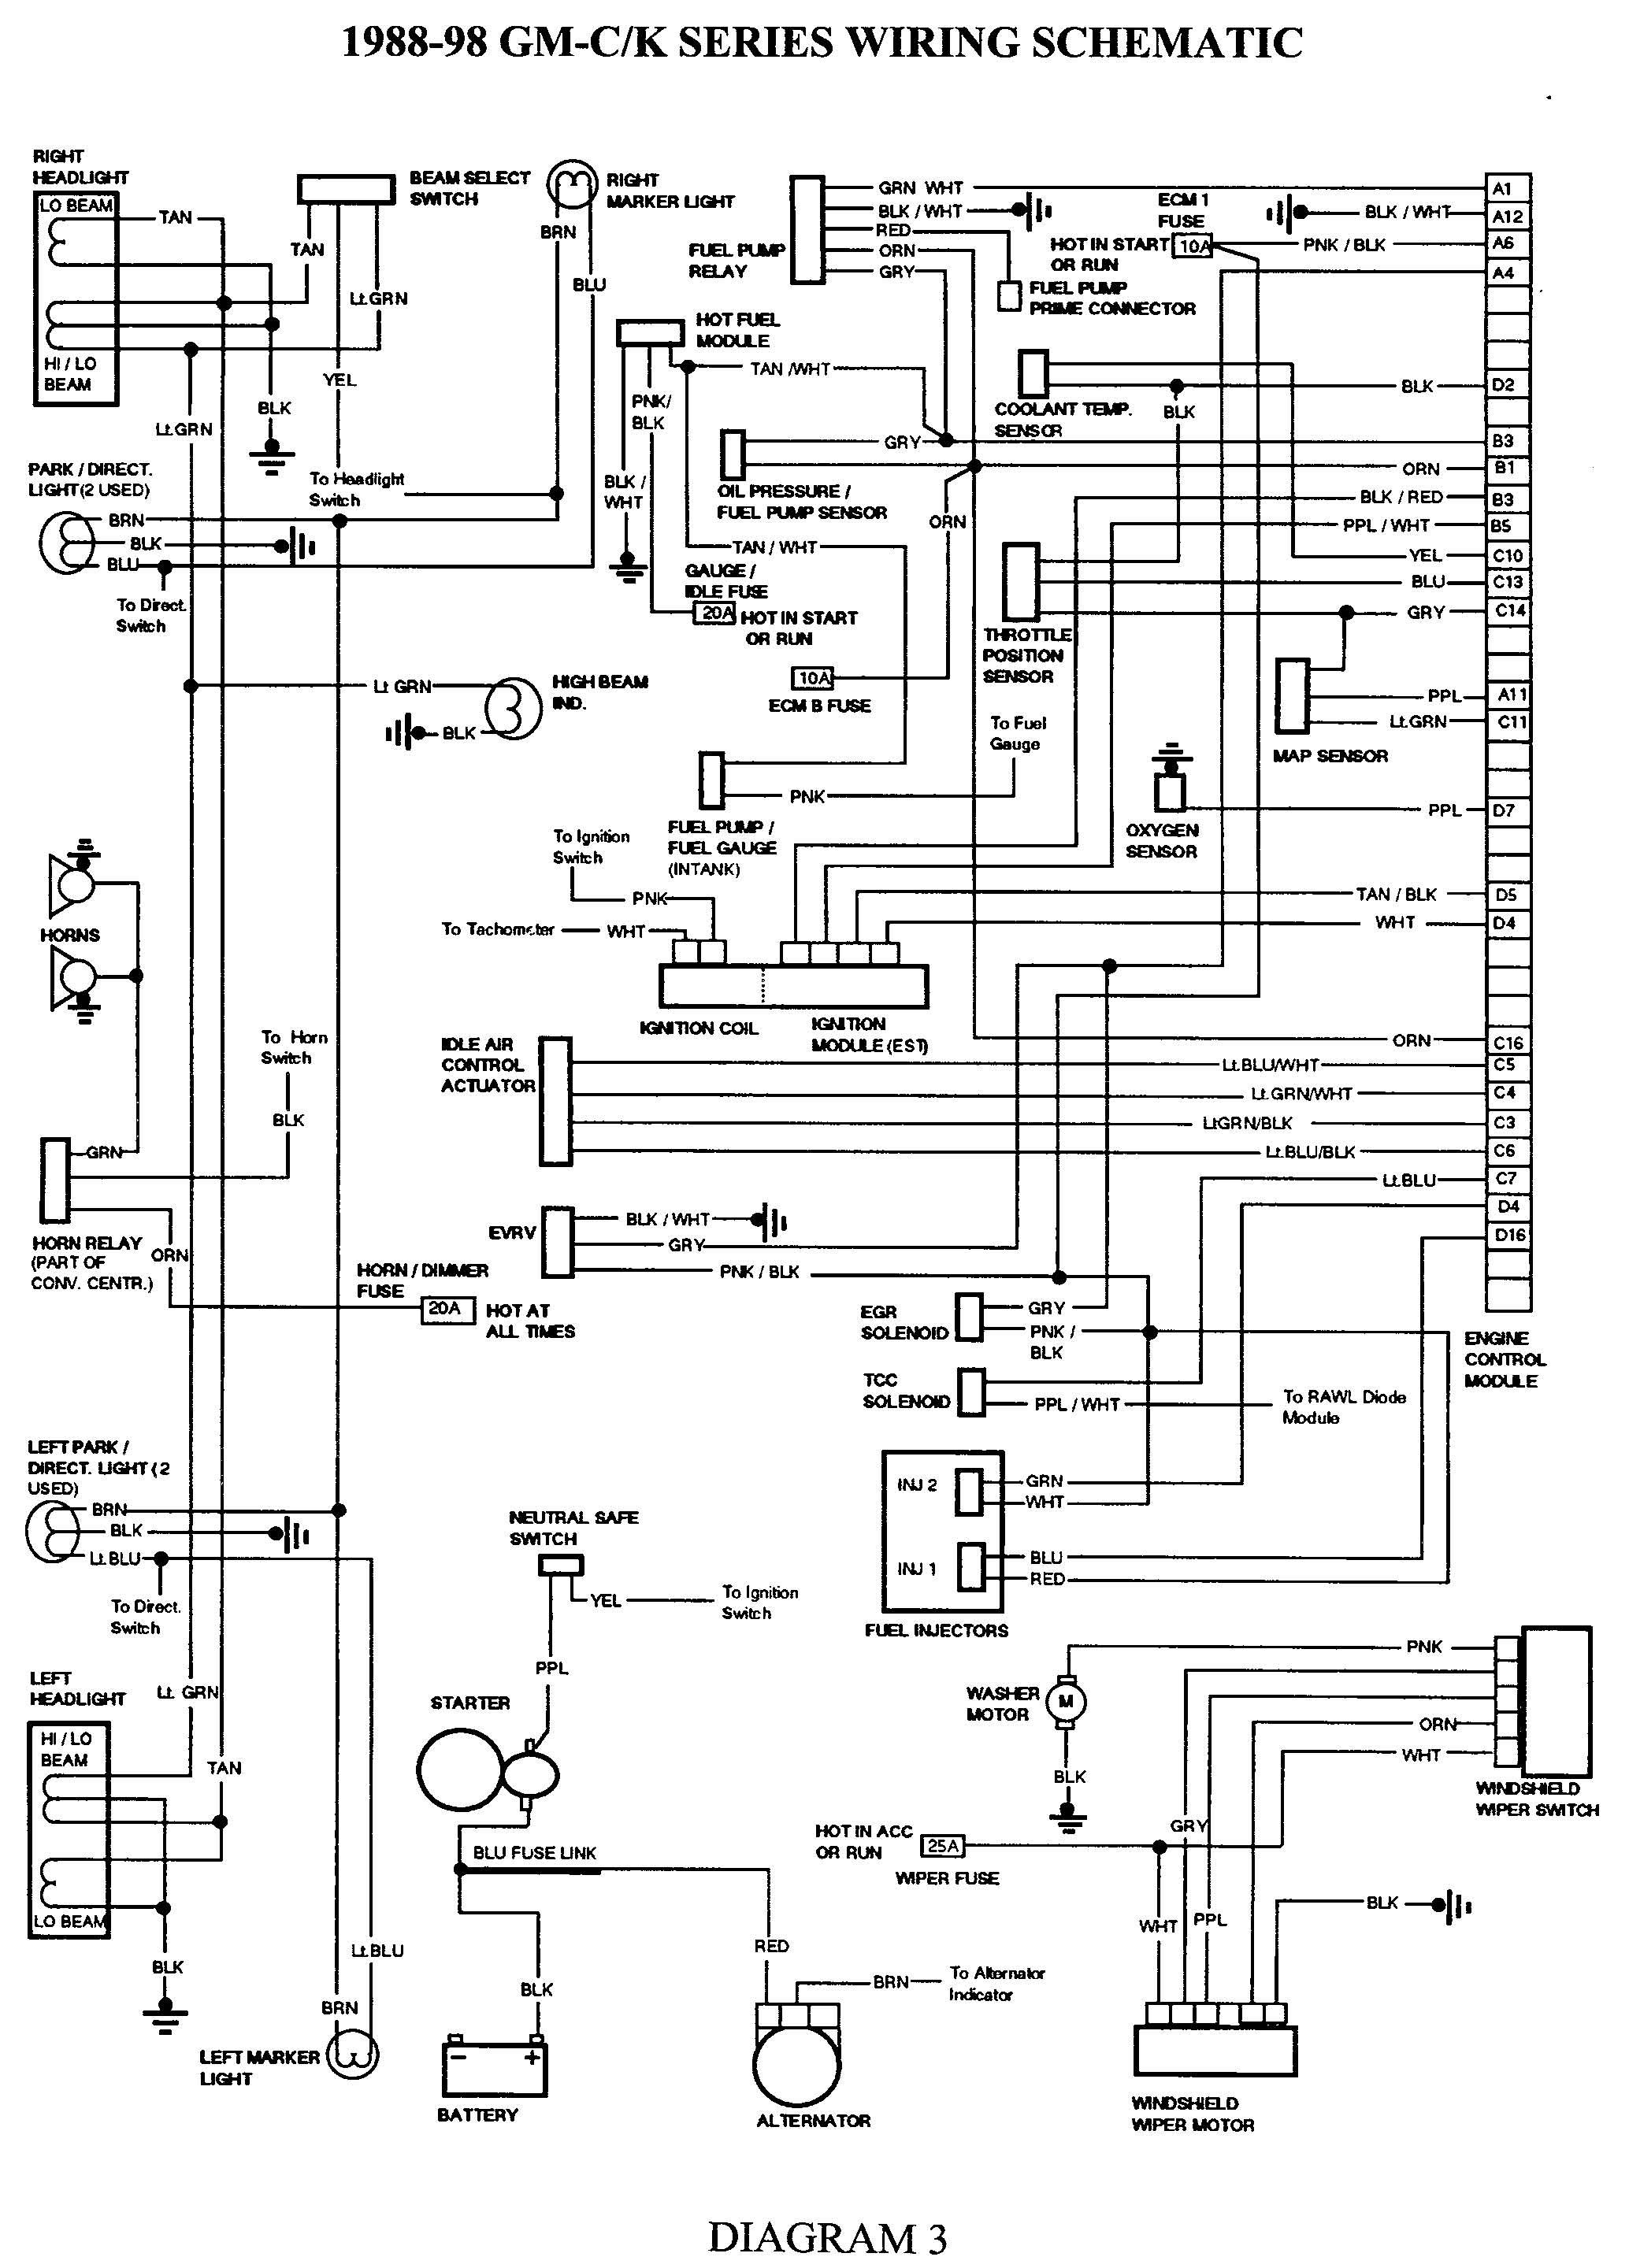 Gmc Truck Wiring Diagrams On Gm Wiring Harness Diagram 88 98 | Kc - 5.7 Vortec Wiring Harness Diagram